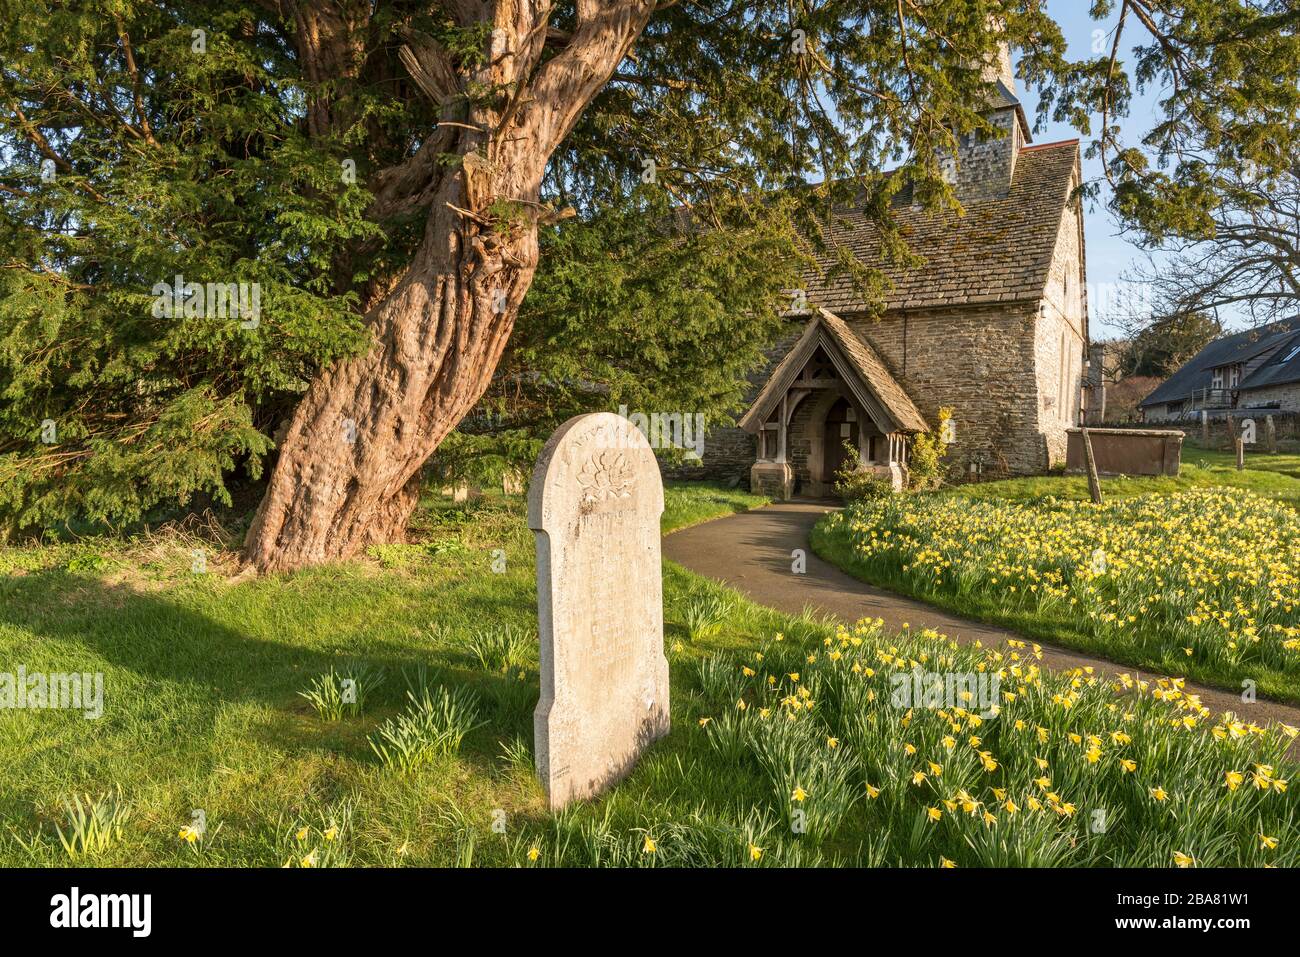 St Michael's Church, Discoed, Powys, Wales. A five thousand year old yew tree (taxus baccata) in the churchyard, one of the 5 oldest trees in  Britain Stock Photo